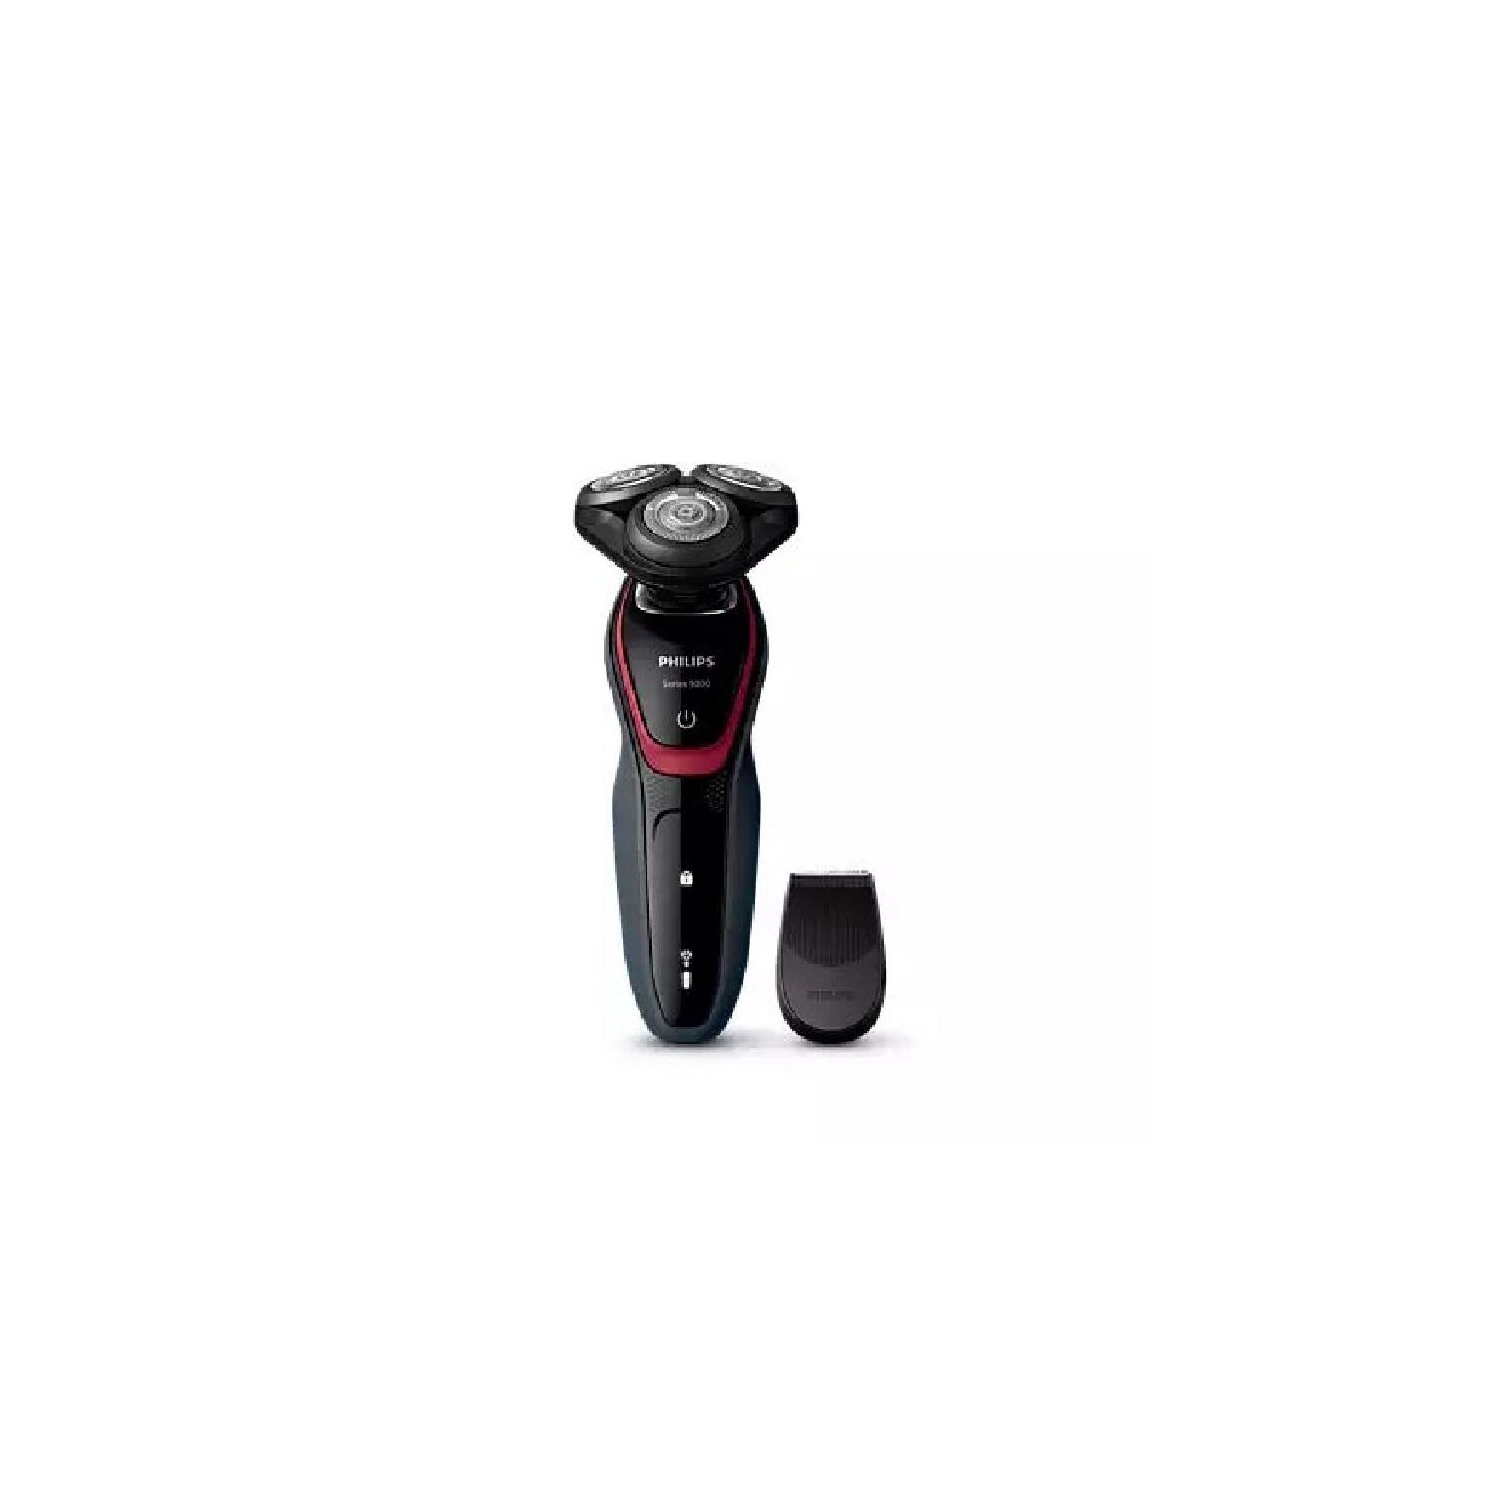 Philips Wet/Dry Electric Cordless Shaver with Multi Precision Blade System, Series 5000, S5230/08